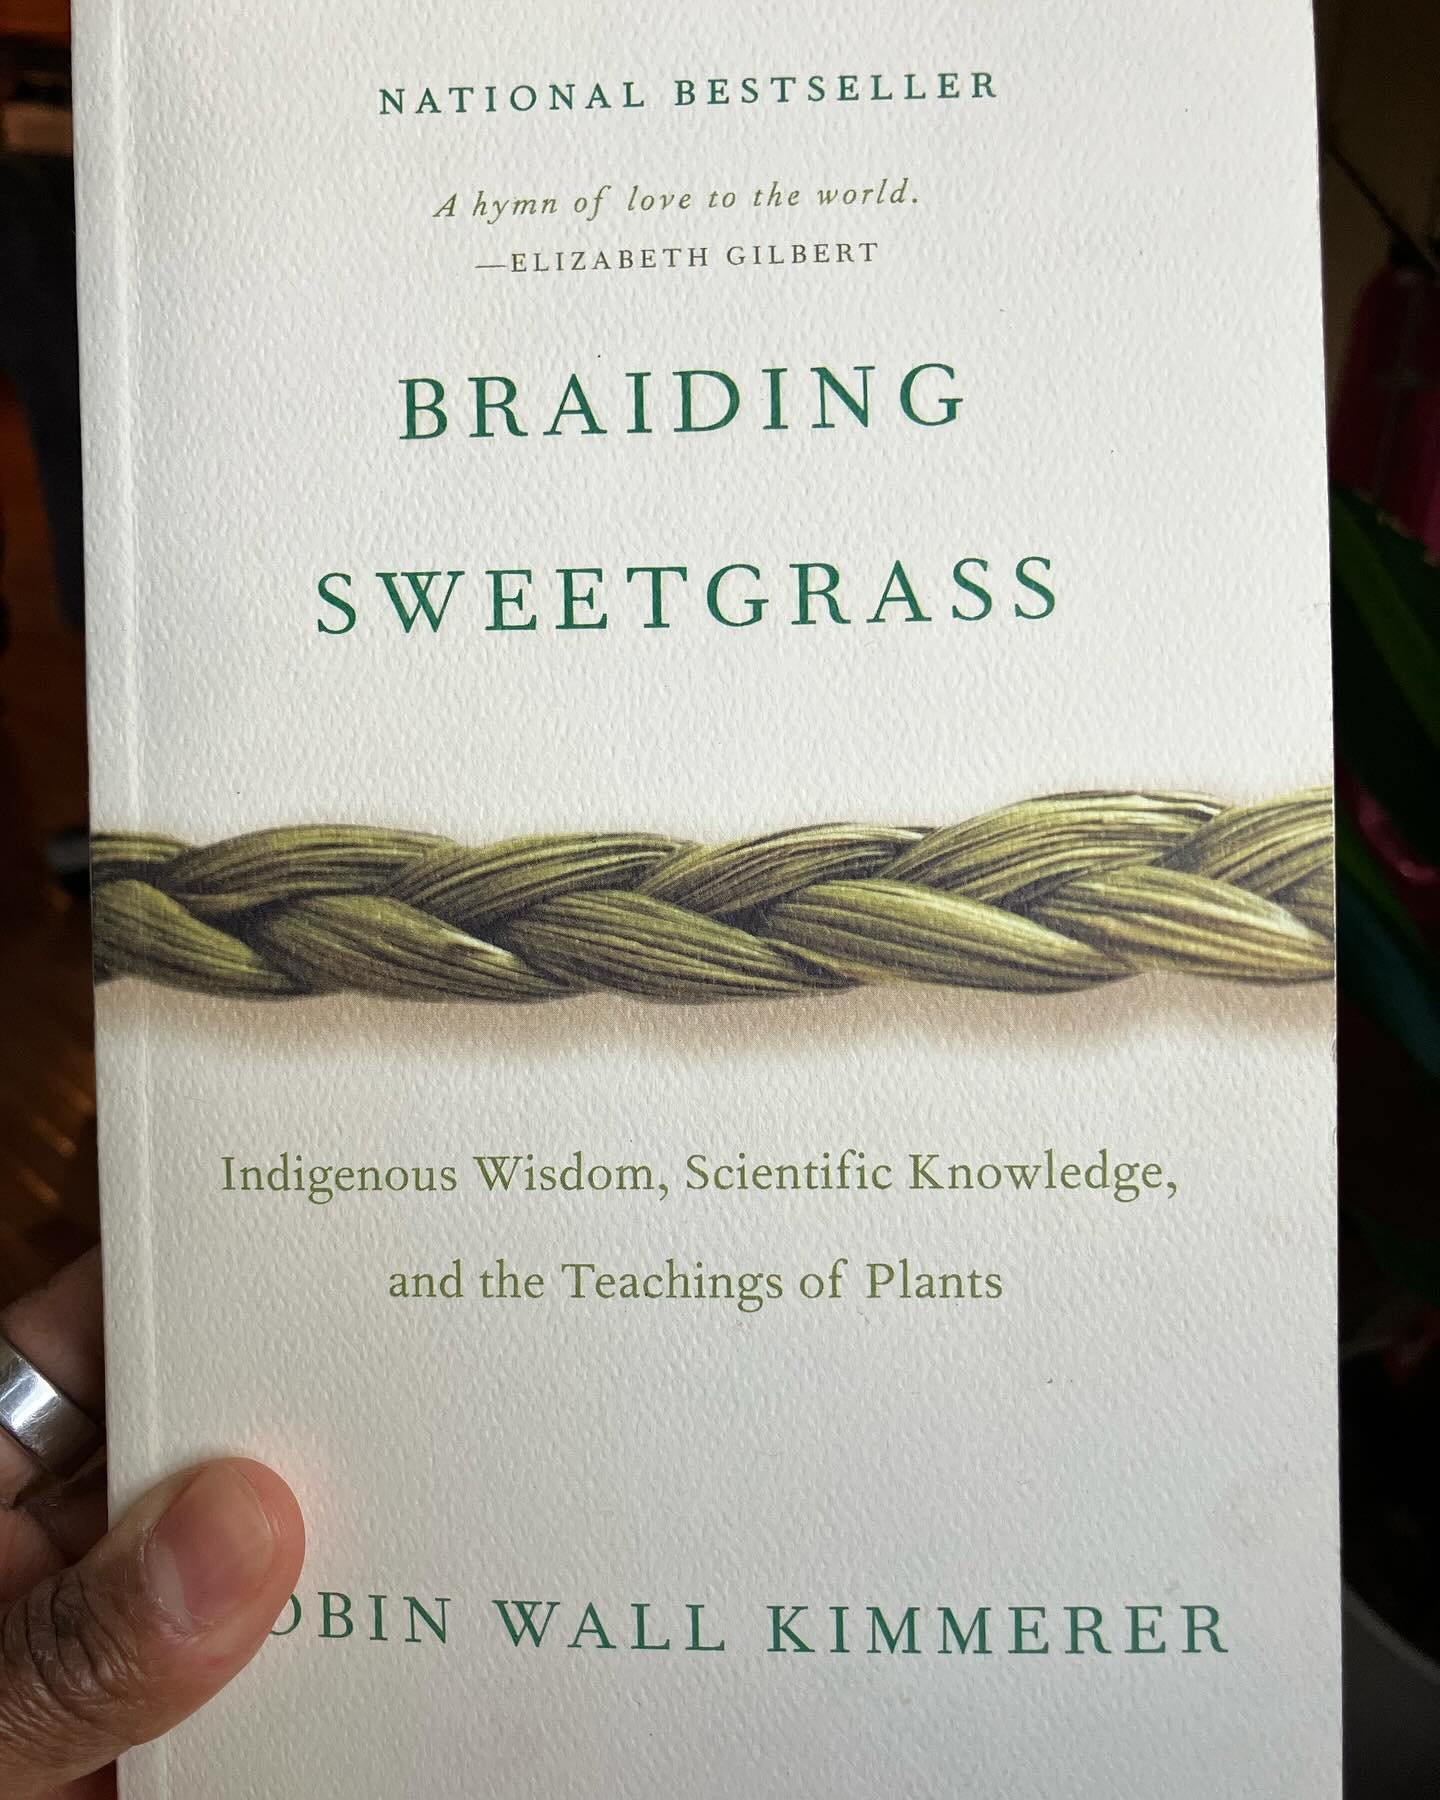 Have you read this titles Braiding Sweetgrass by Robin Wall Kimmerer? It took me a while but it was worth every second. Not only was it beautifully written, but listening to the author read it was magical. I learned a lot about this turtle island and